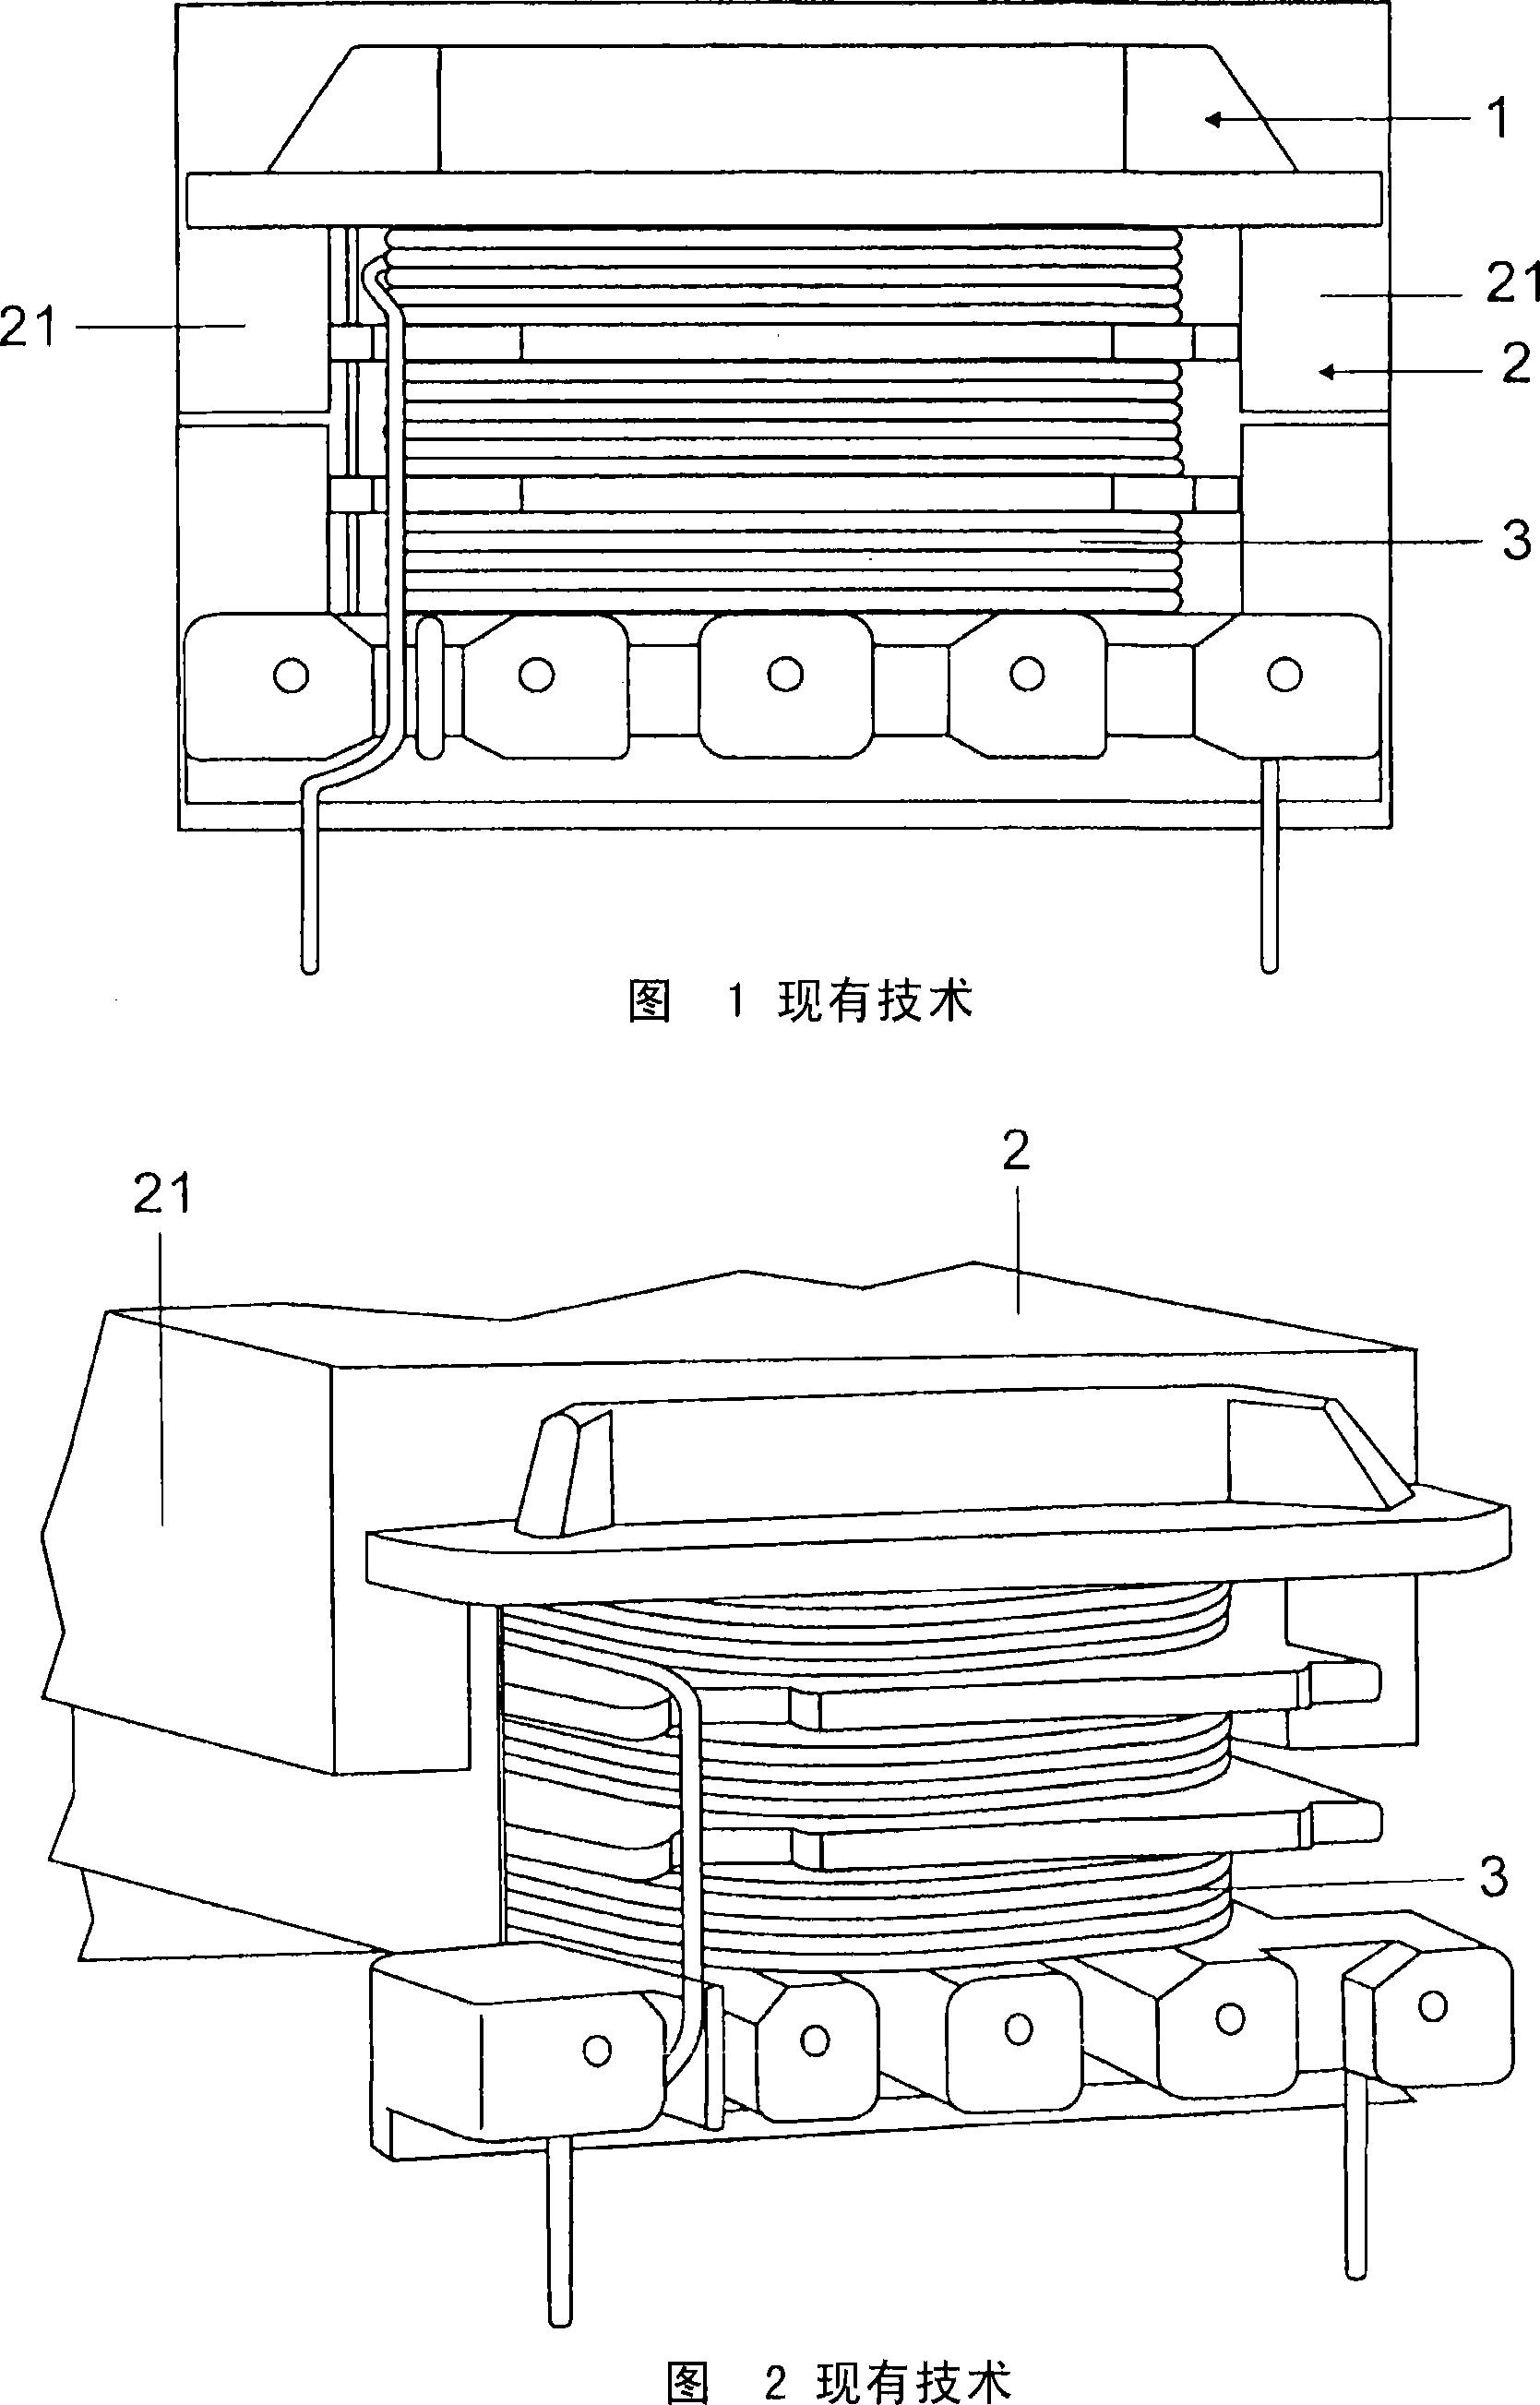 Coil body for an electric coil and method for producing an electronic element provided with said coil body